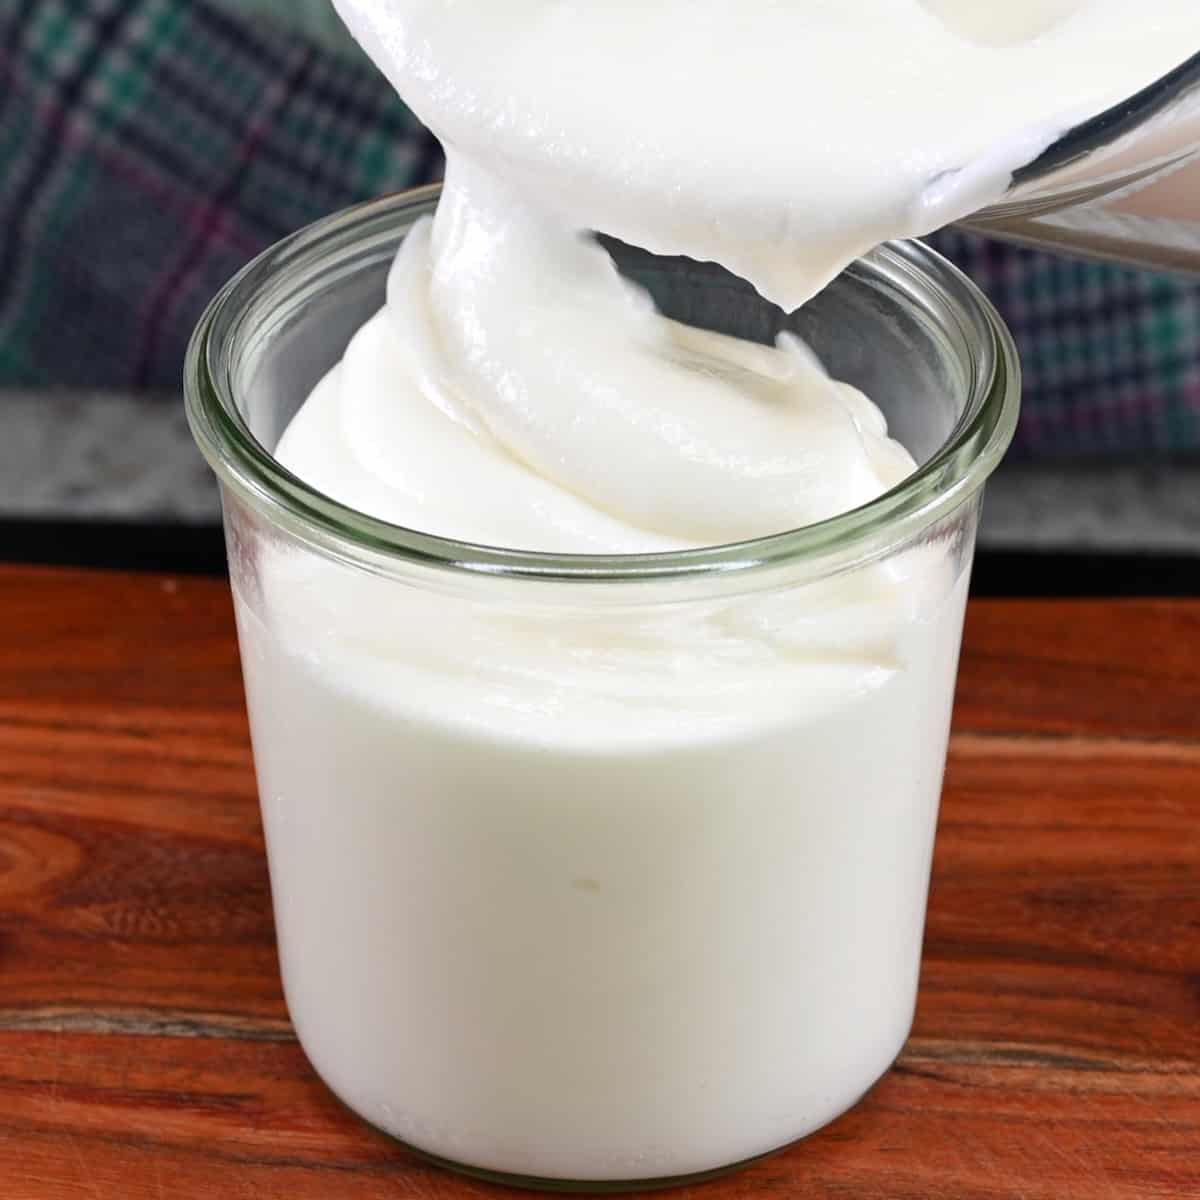 Spooning garlic sauce into a glass container